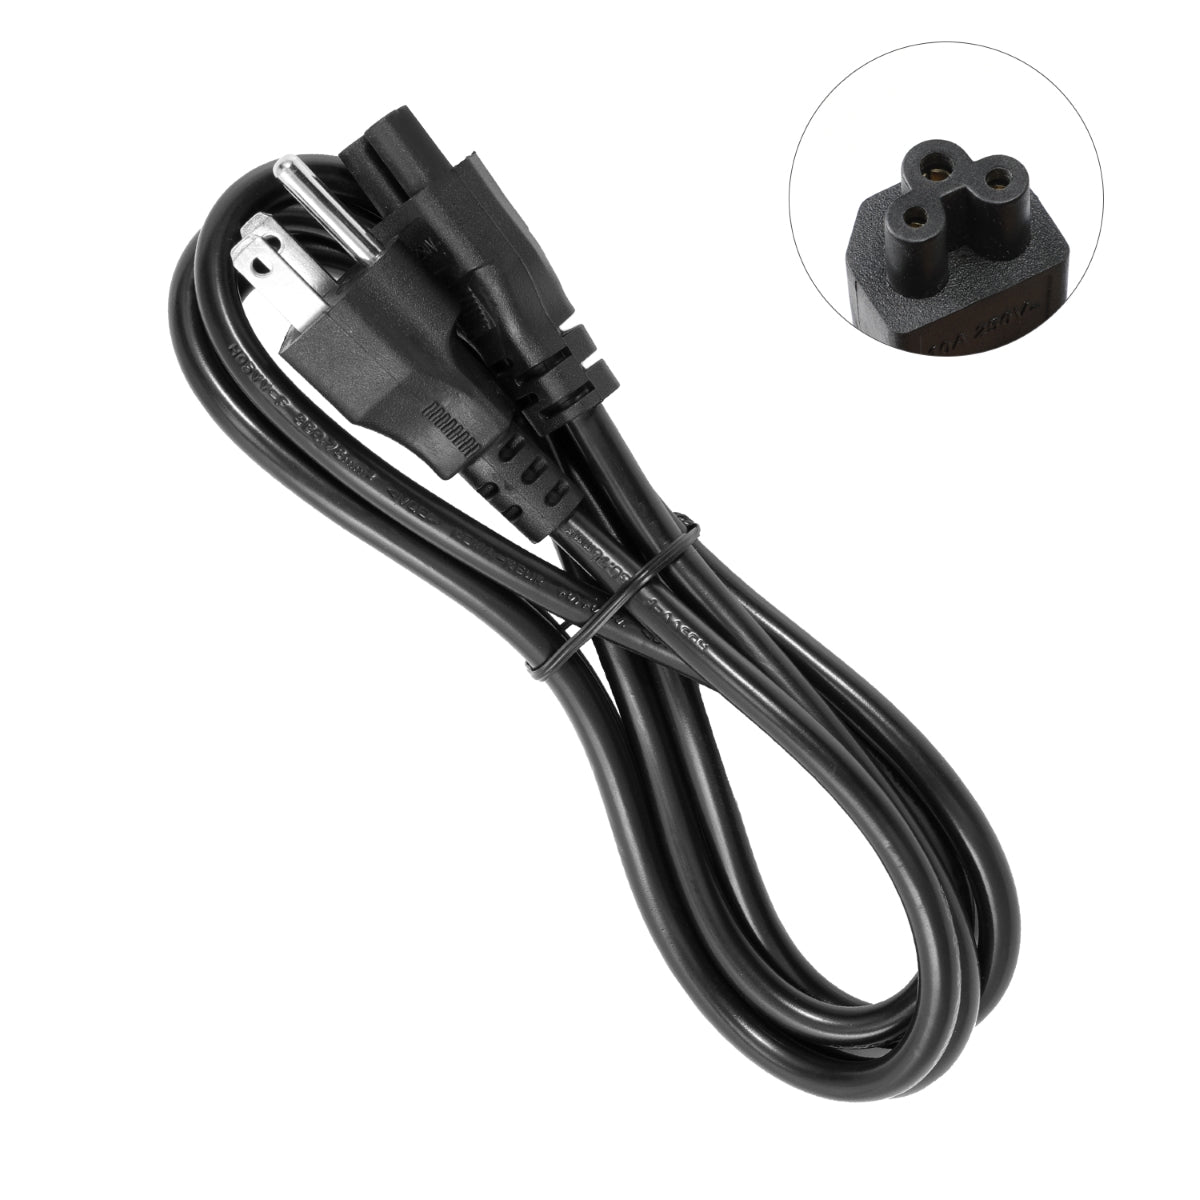 Power Cord for LG 47LB6100 Monitor.